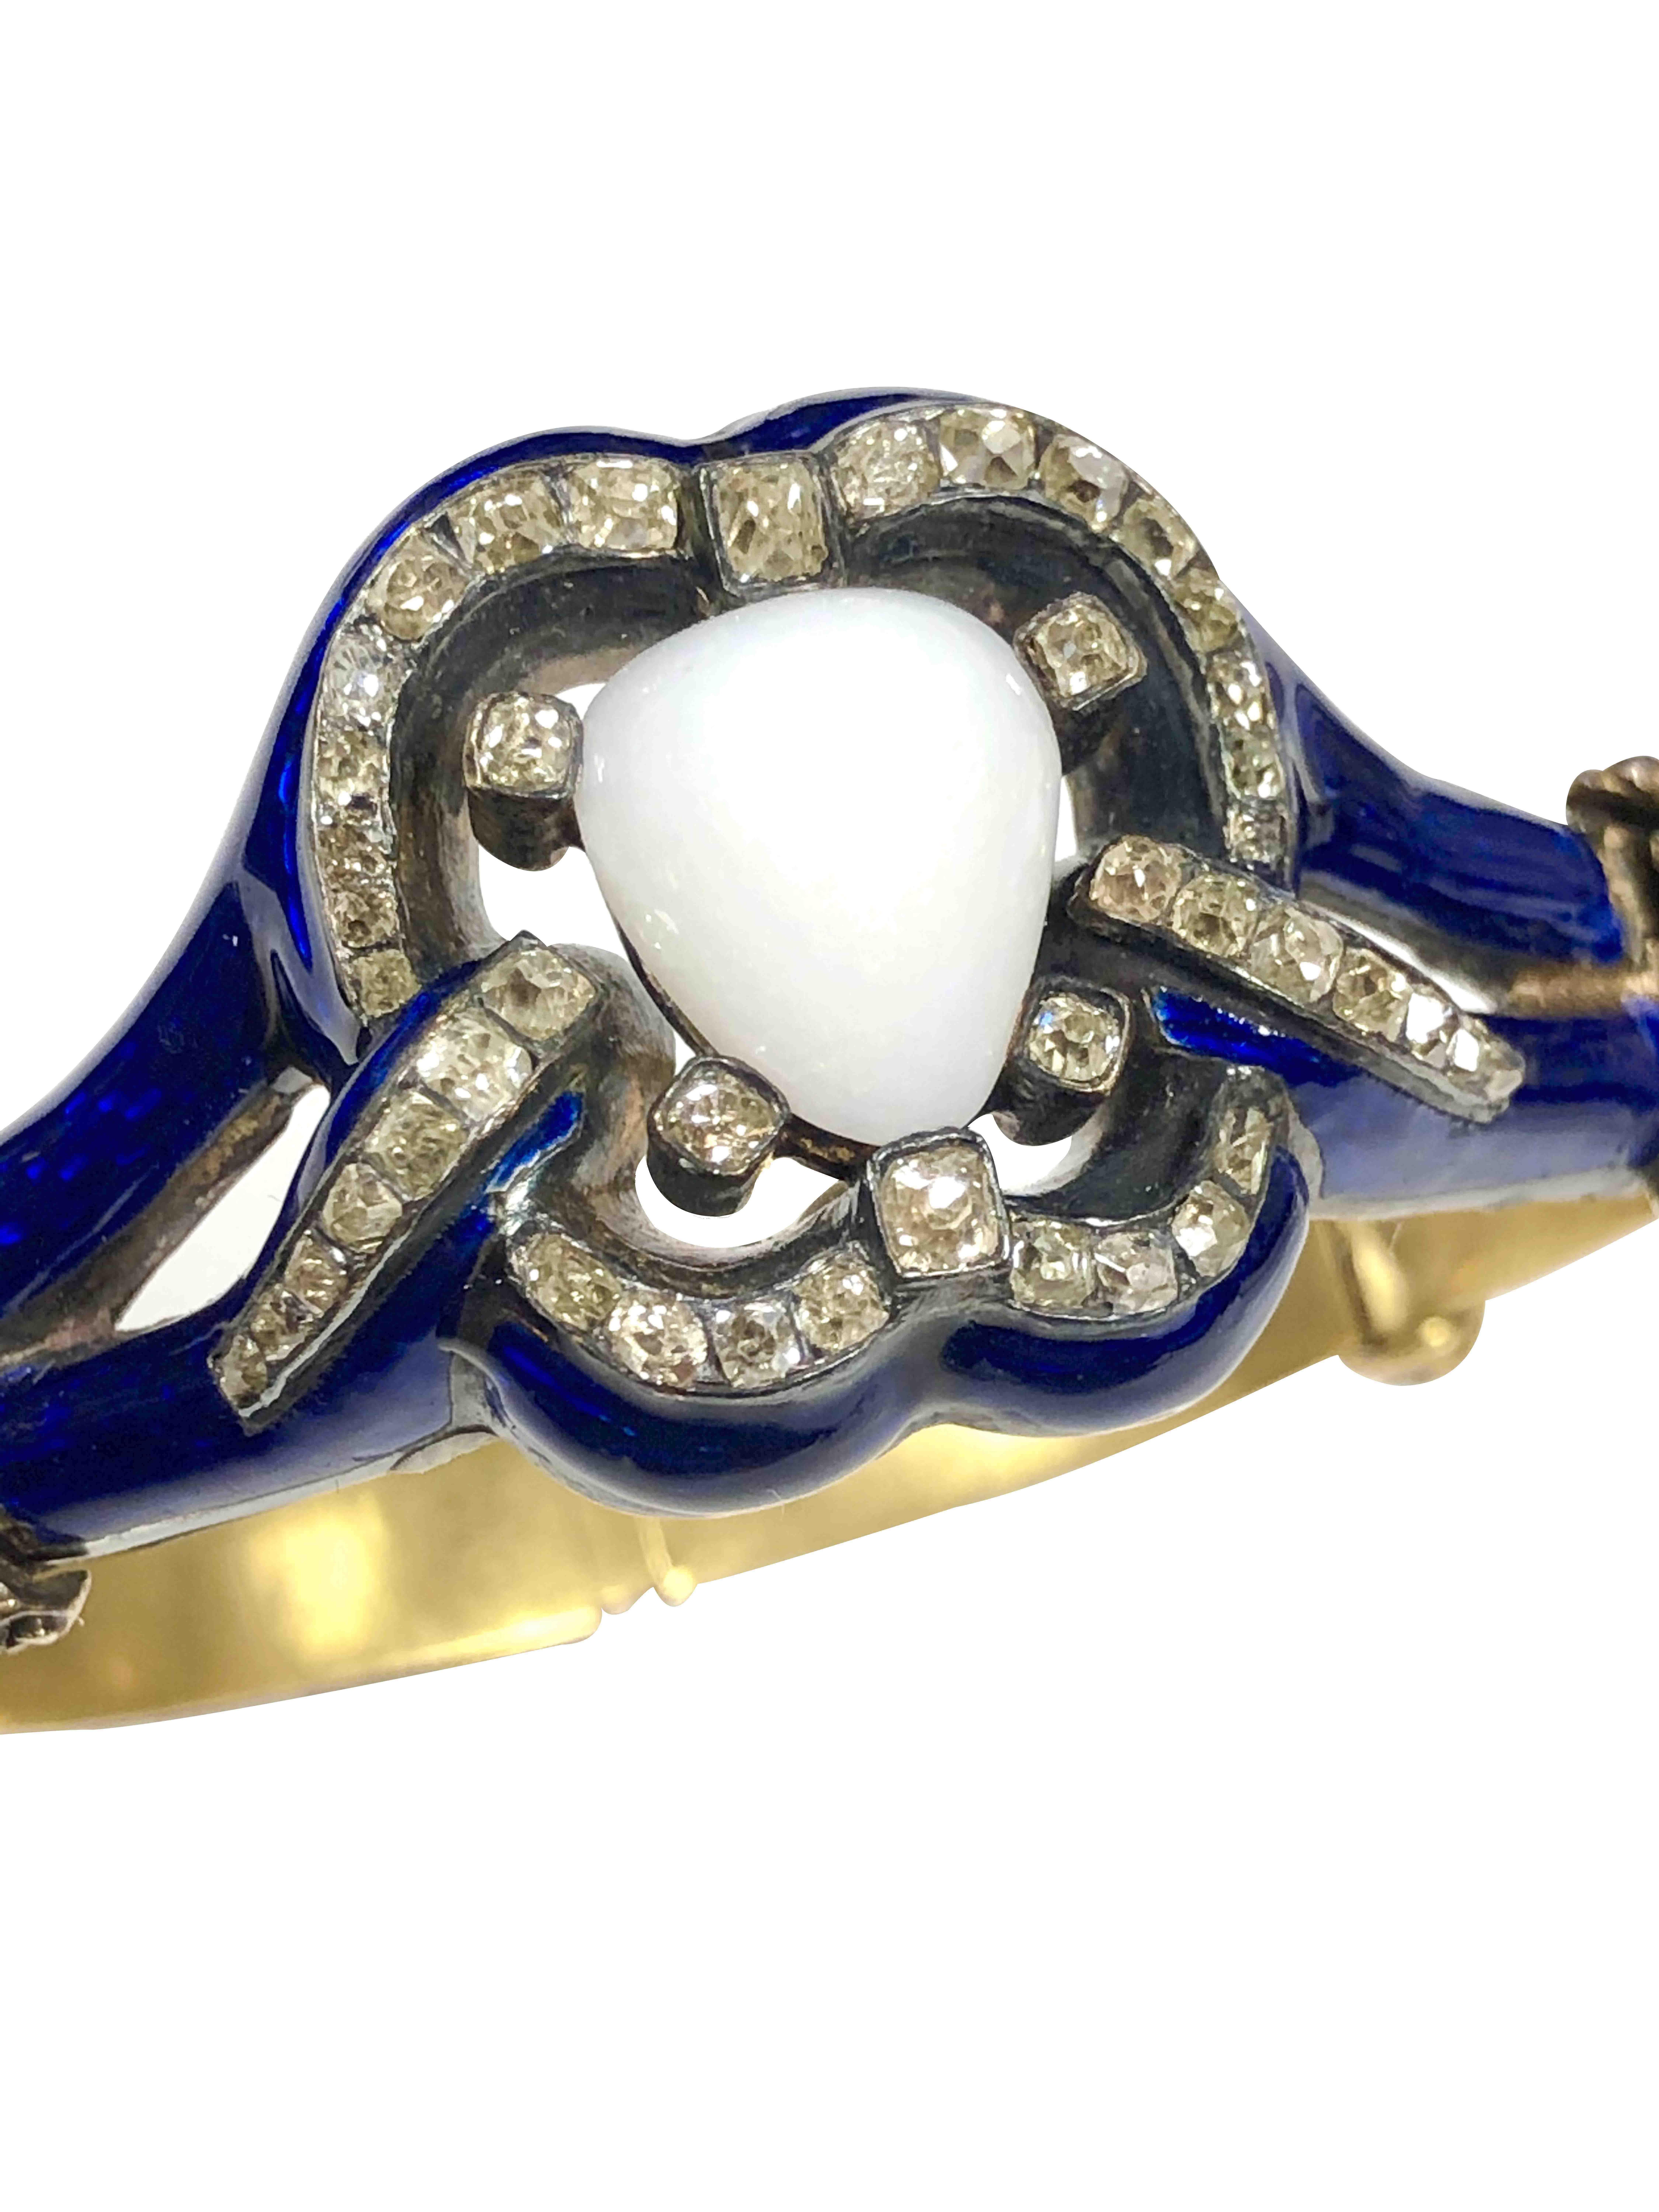 Circa 1850s Yellow Gold Bangle Bracelet, This fine mid Victorian period piece is masterfully made up of several hinged sections, with hand chased Gold work and deep Cobalt Blue Enamel. Set with Mine cut and Rose cut Diamonds and centrally set with a